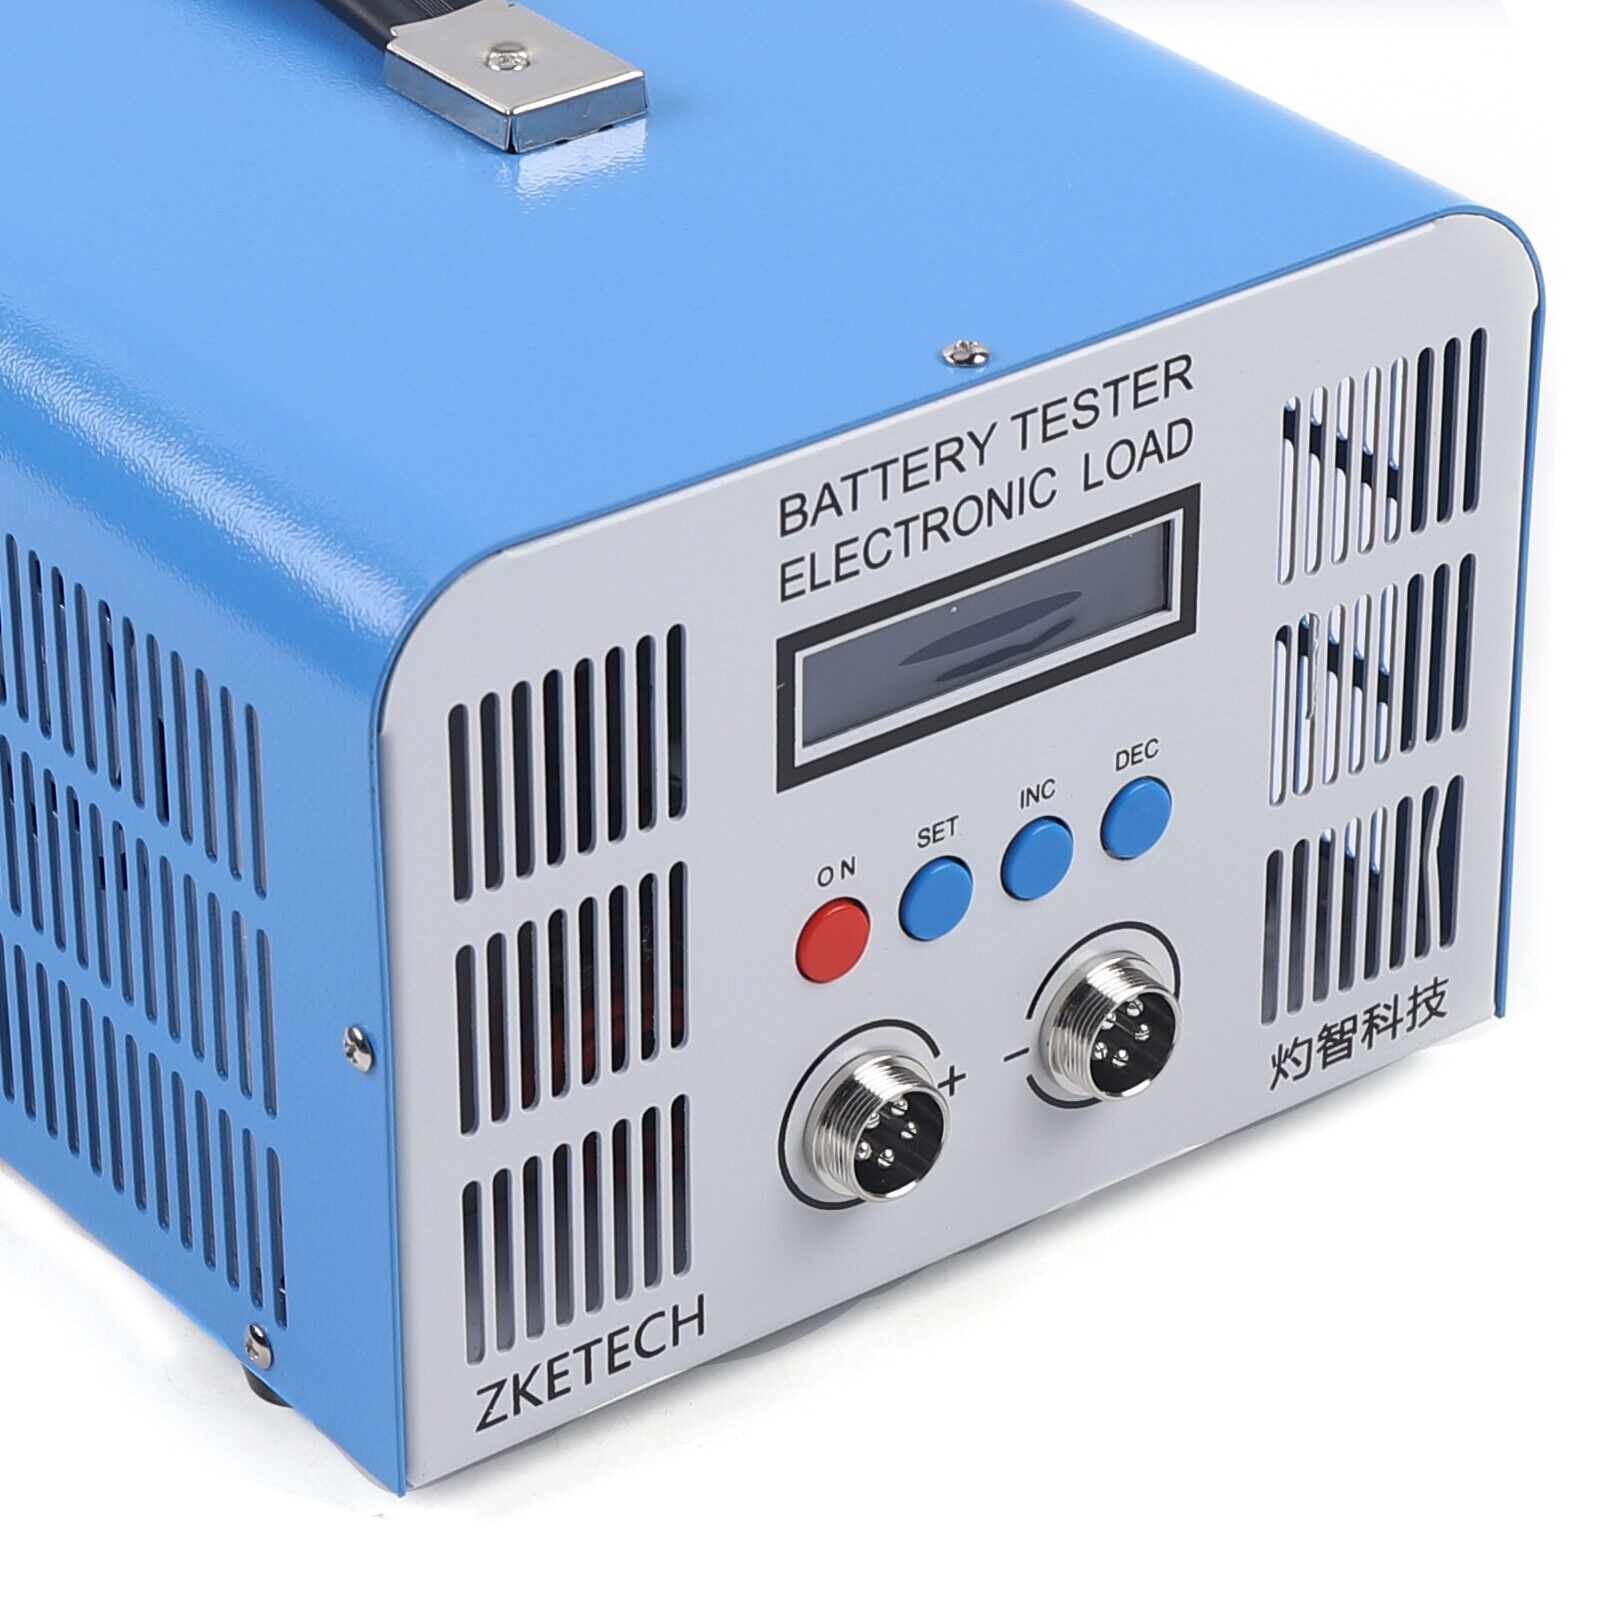 EBC-A40L 5V High Current Lithium Battery Capacity Tester 40A Charge & Discharge Unbranded Does Not Apply - фотография #8